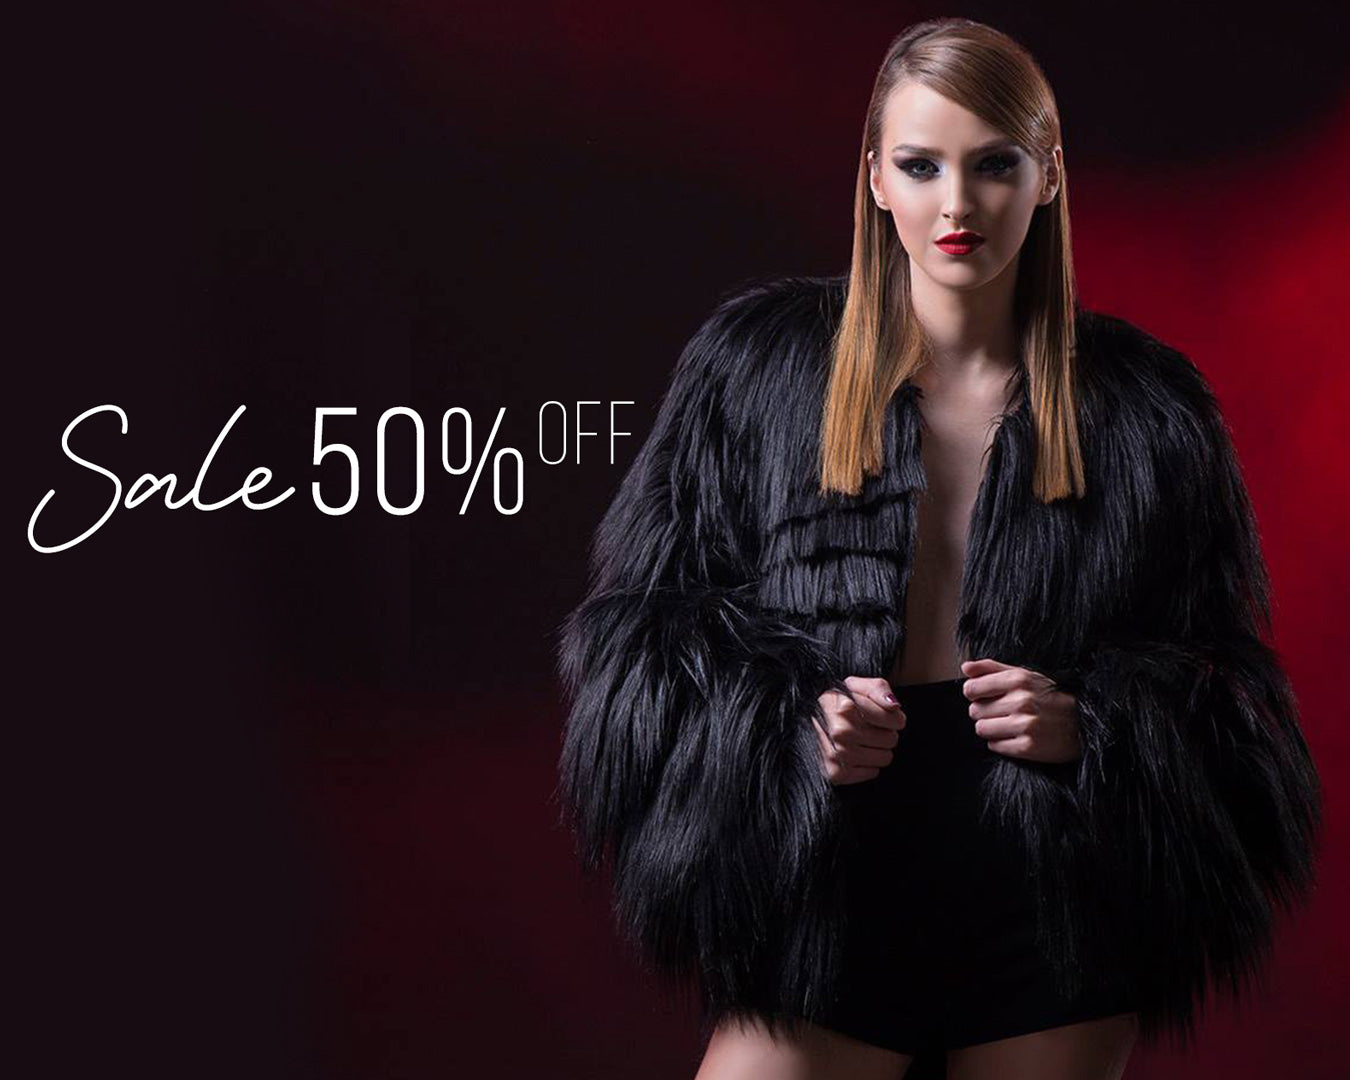 OCTOBER SALE – GET 50% DISCOUNT FOR ALL THE COATS